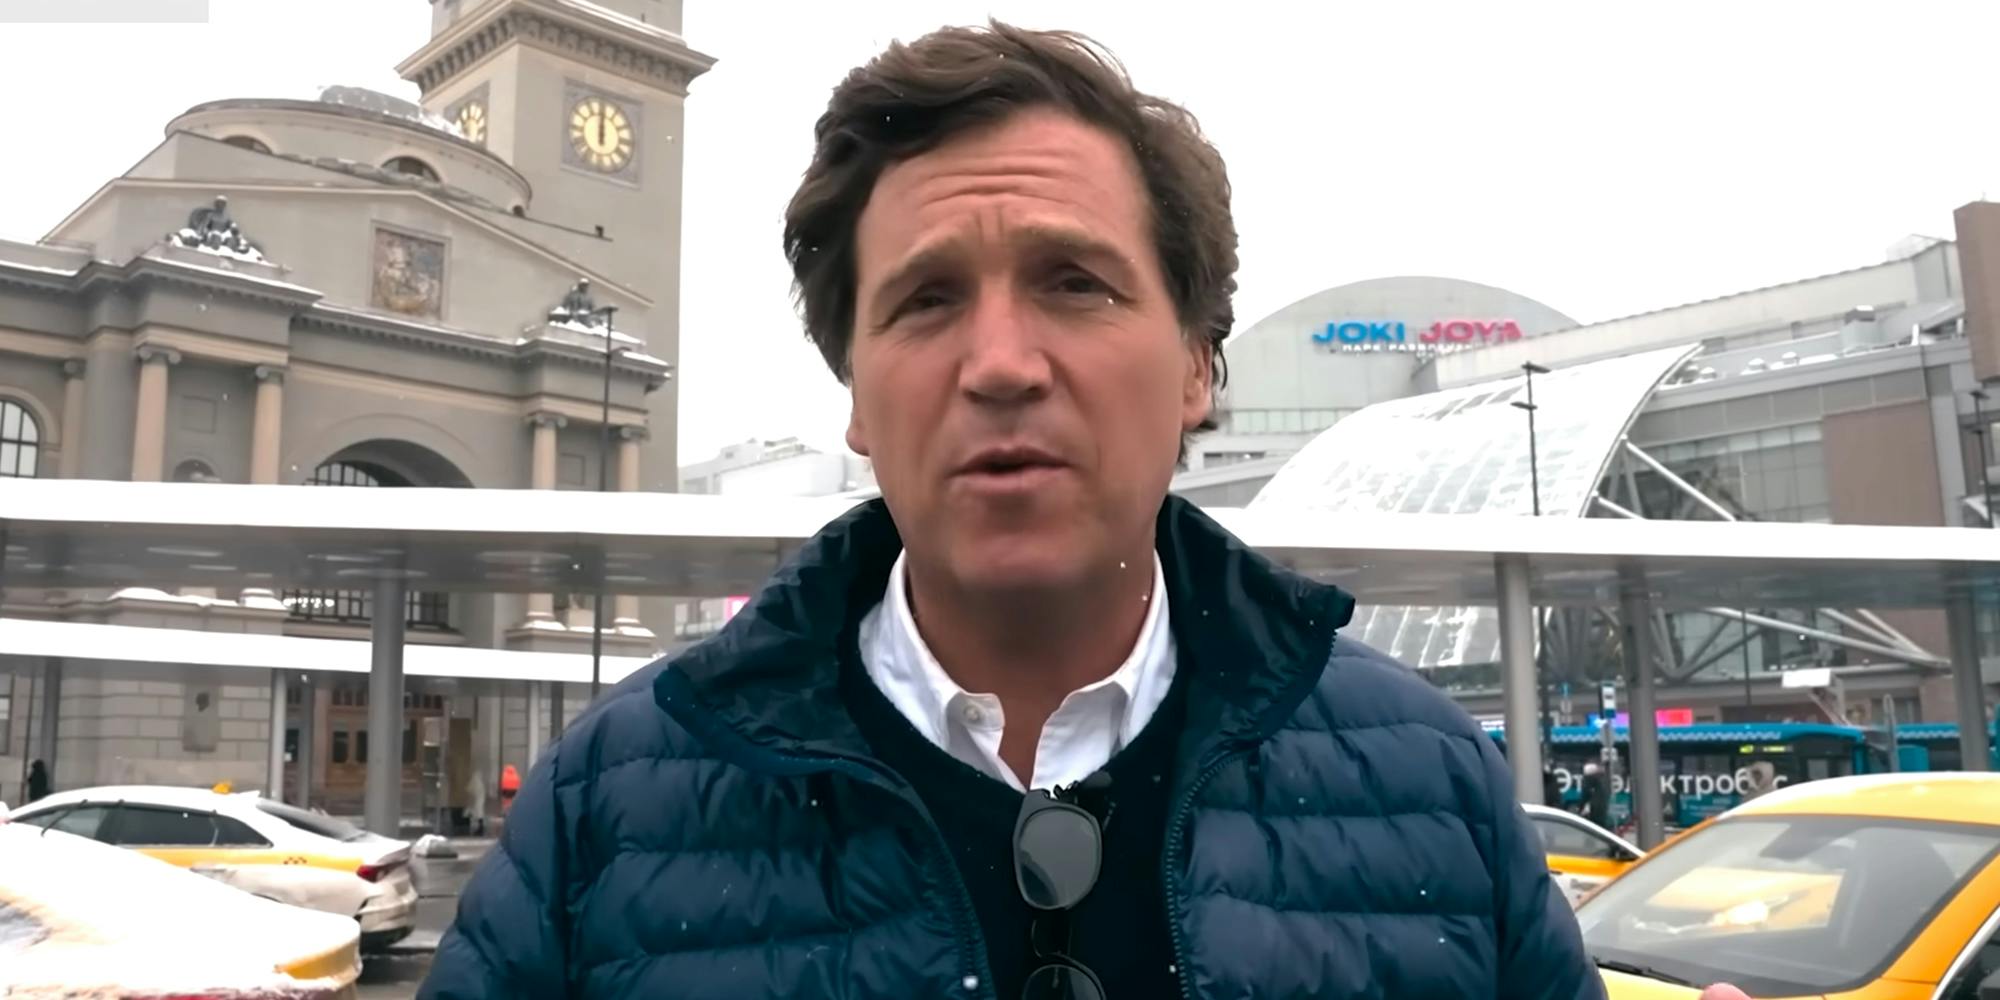 Tucker Carlson cites famous excuse used to defend Italian dictator while praising Putin's Russia